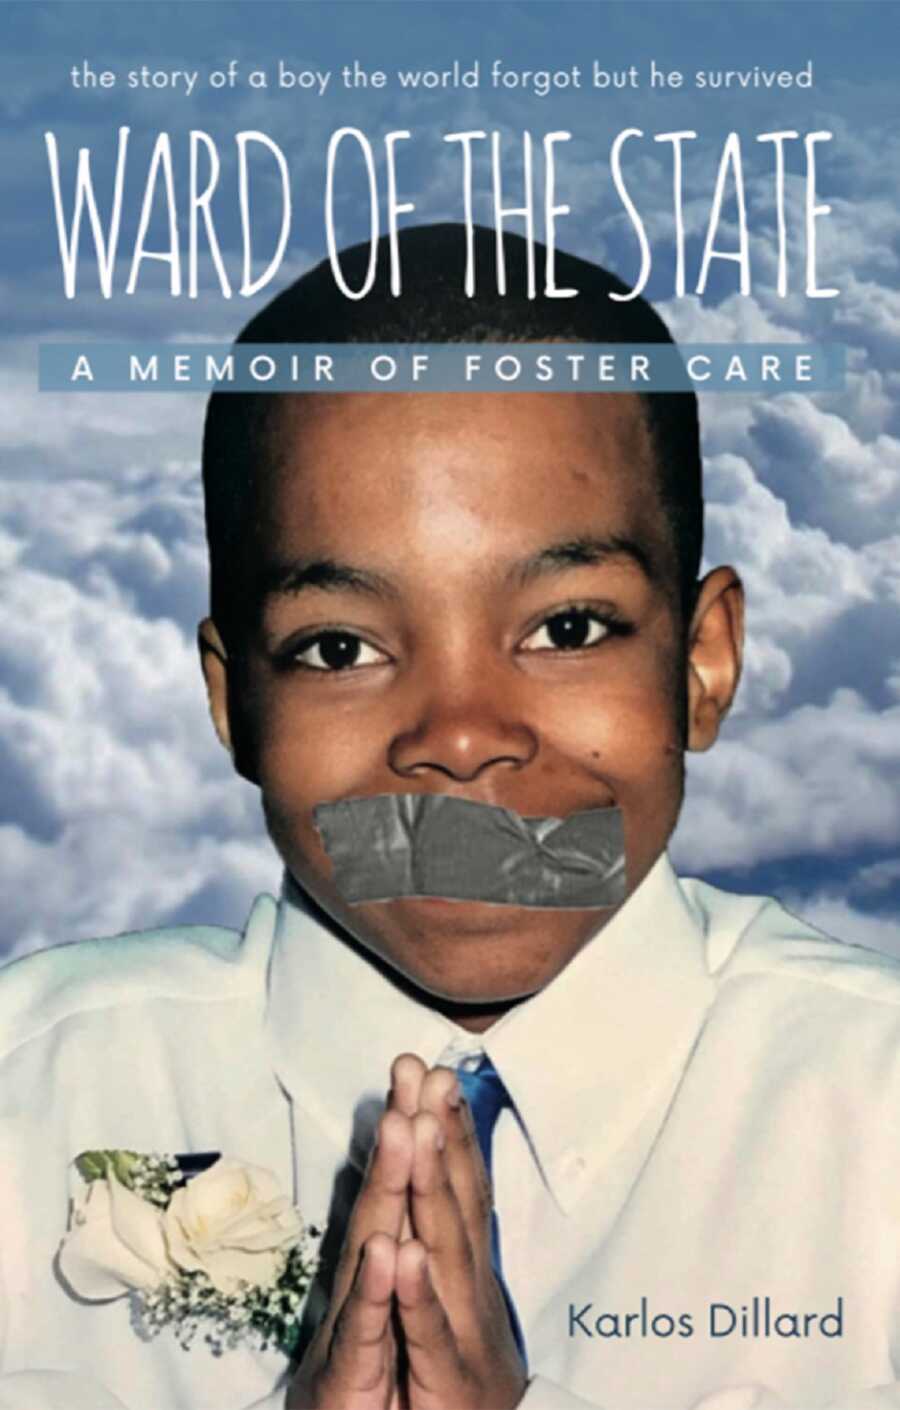 Book by Karlos Dillard called Wards of the State: A Memoir of foster care